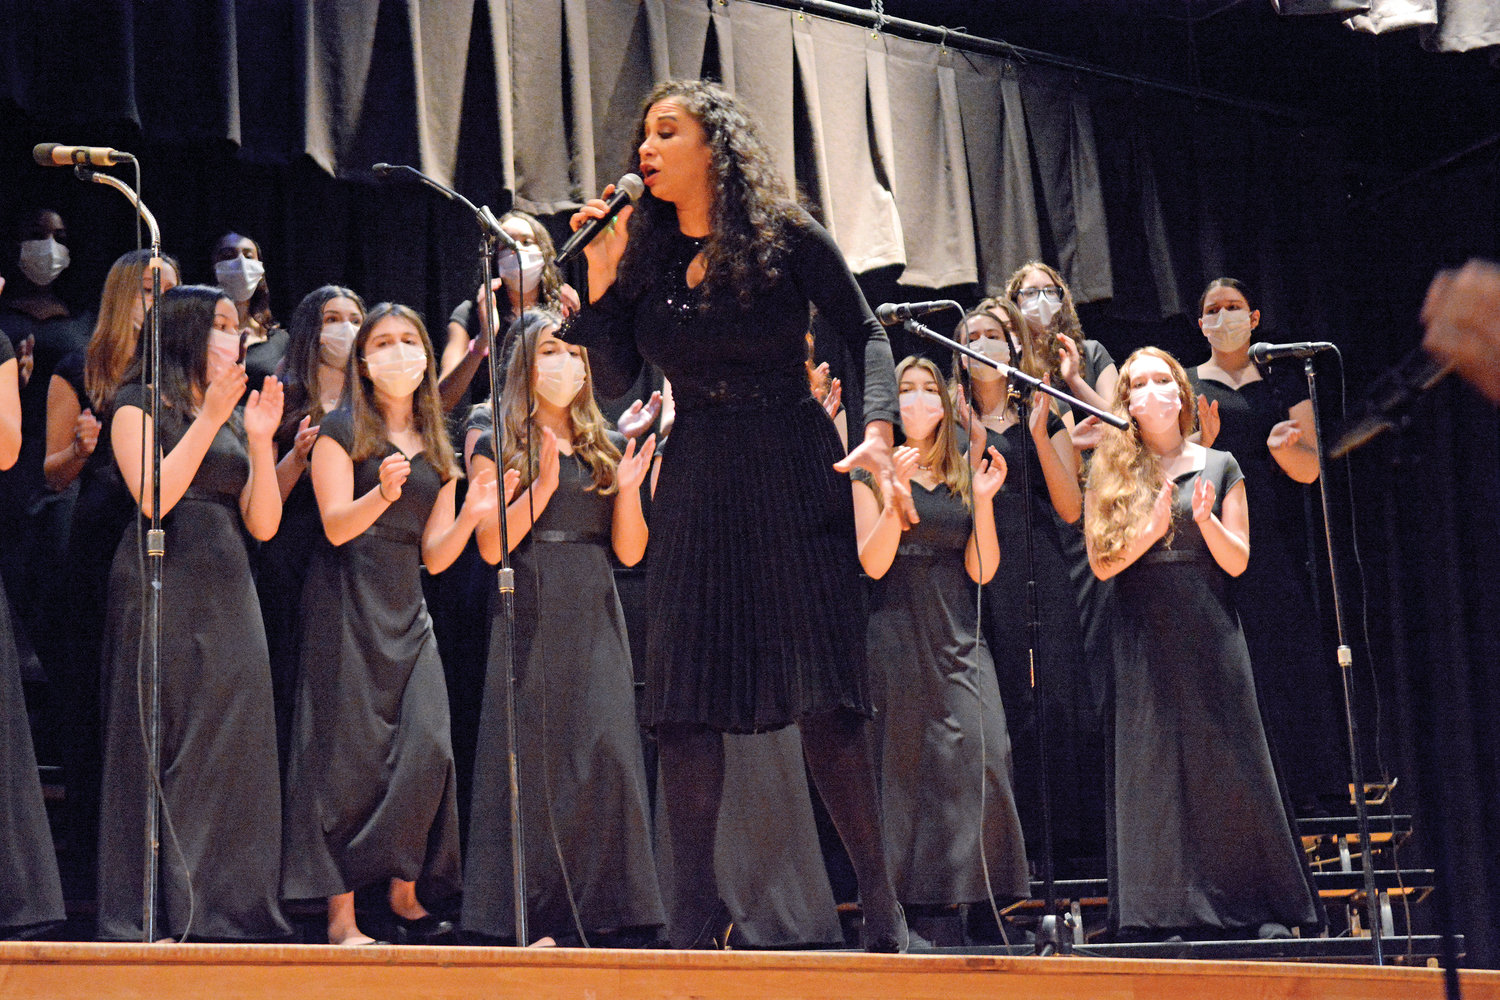 Ahmaya Knoelle Higginson performs with the student honors choir. The student honors choir had prepared by learning Gospel spirituals such as “Lift Every Voice and Sing” and “Steal Away” from La Fredrick Coaxner, the choir director of Harlem’s Abyssinian Baptist Church.